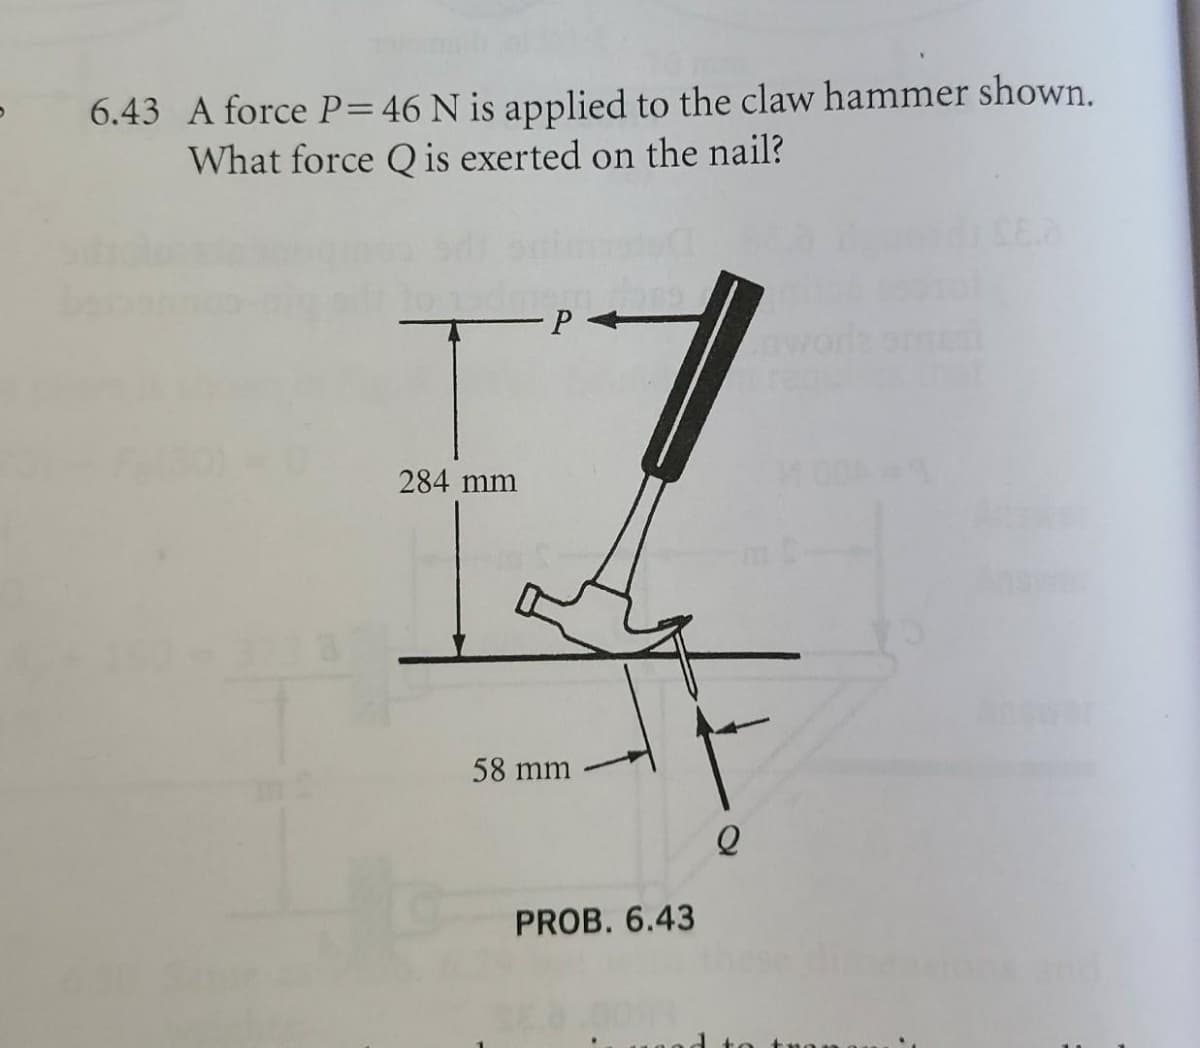 6.43 A force P= 46 N is applied to the claw hammer shown.
What force Q is exerted on the nail?
P
I
284 mm
58 mm
PROB. 6.43
Q